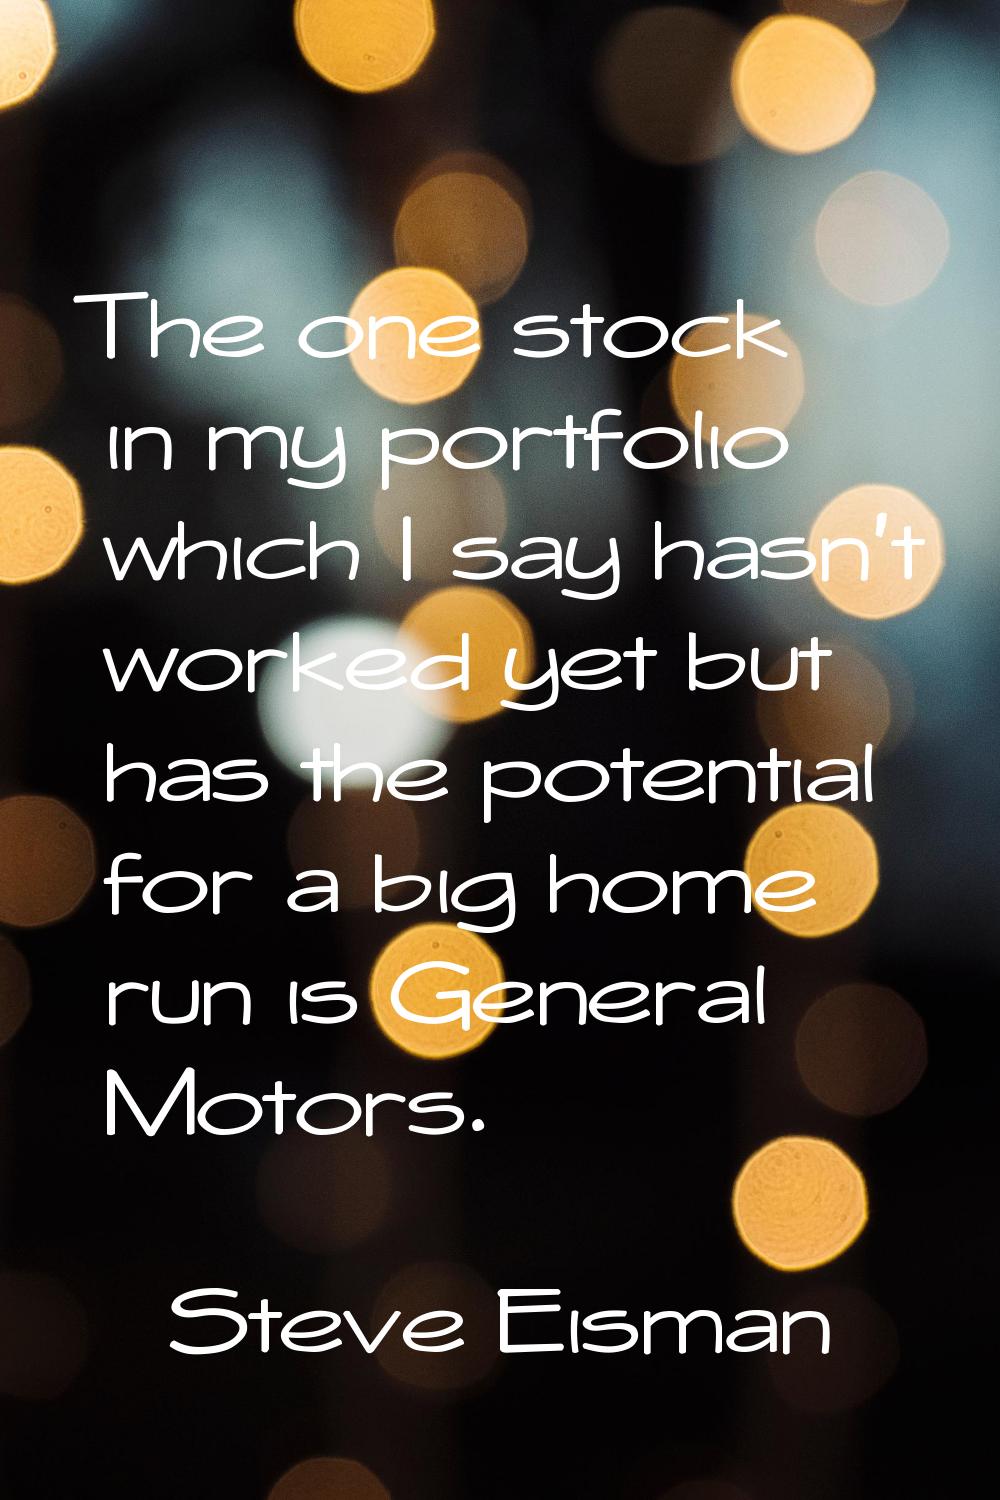 The one stock in my portfolio which I say hasn't worked yet but has the potential for a big home ru